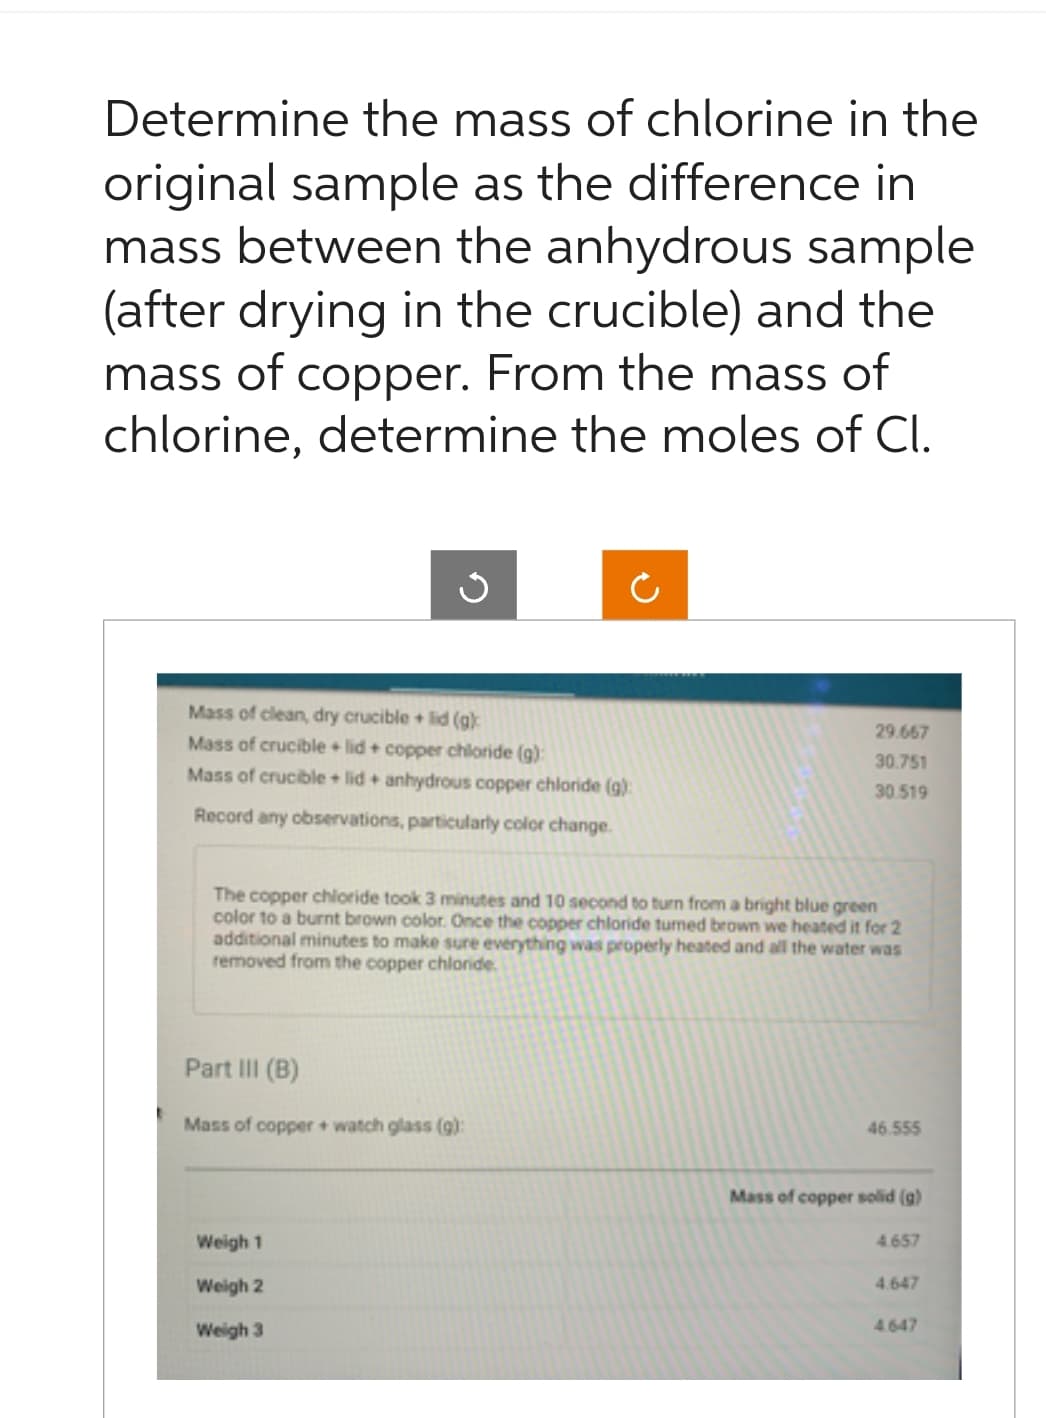 Determine the mass of chlorine in the
original sample as the difference in
mass between the anhydrous sample
(after drying in the crucible) and the
mass of copper. From the mass of
chlorine, determine the moles of Cl.
J
Mass of clean, dry crucible + lid (g):
Mass of crucible + lid + copper chloride (g):
Mass of crucible + lid + anhydrous copper chloride (g):
Record any observations, particularly color change.
The copper chloride took 3 minutes and 10 second to turn from a bright blue green
color to a burnt brown color. Once the copper chloride turned brown we heated it for 2
additional minutes to make sure everything was properly heated and all the water was
removed from the copper chloride.
Part III (B)
Mass of copper + watch glass (g):
Weigh 1
Weigh 2
Weigh 3
29.667
30.751
30.519
46.555
Mass of copper solid (g)
4.657
4.647
4.647